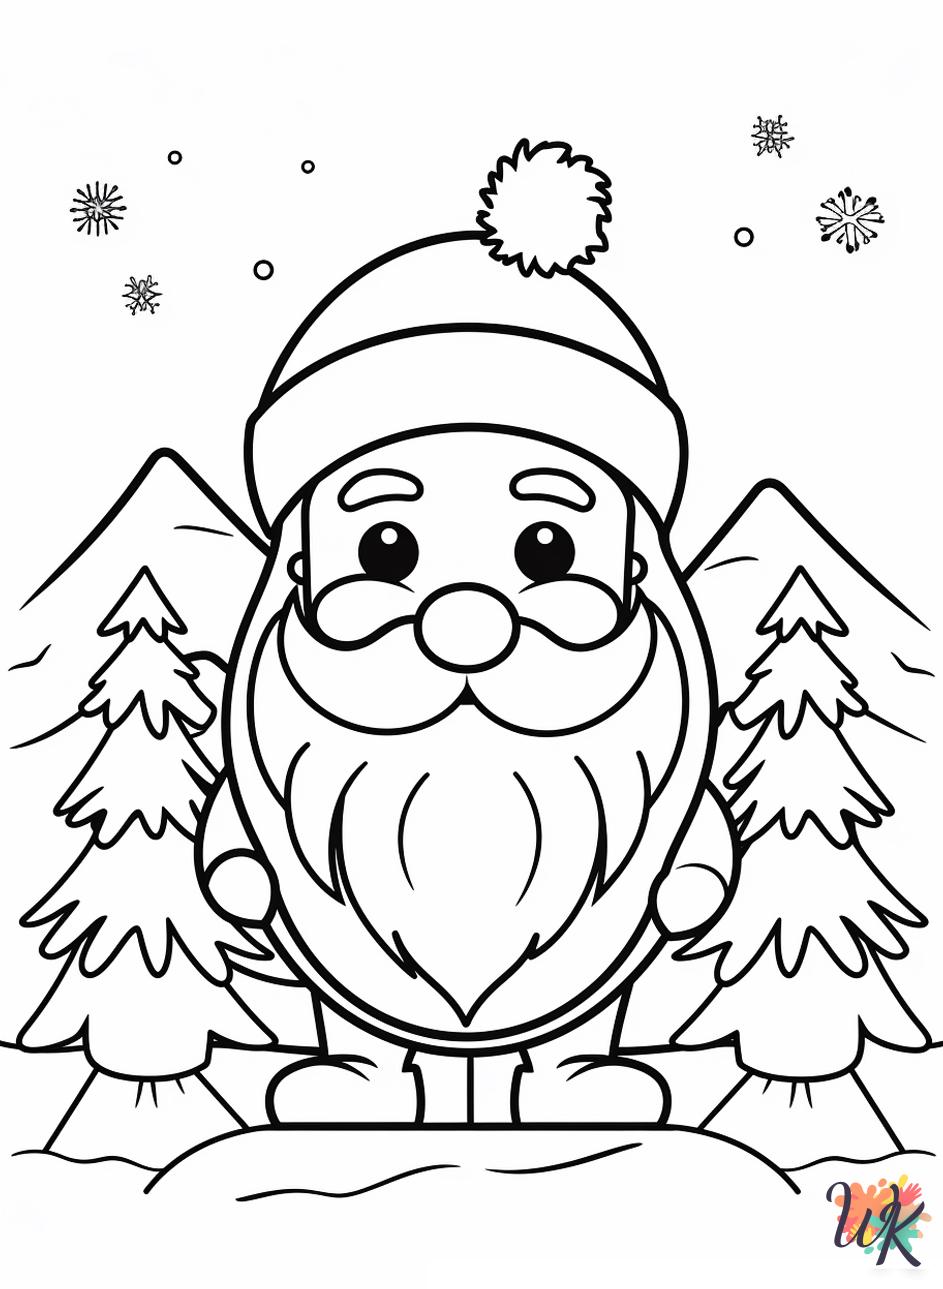 grinch December coloring pages